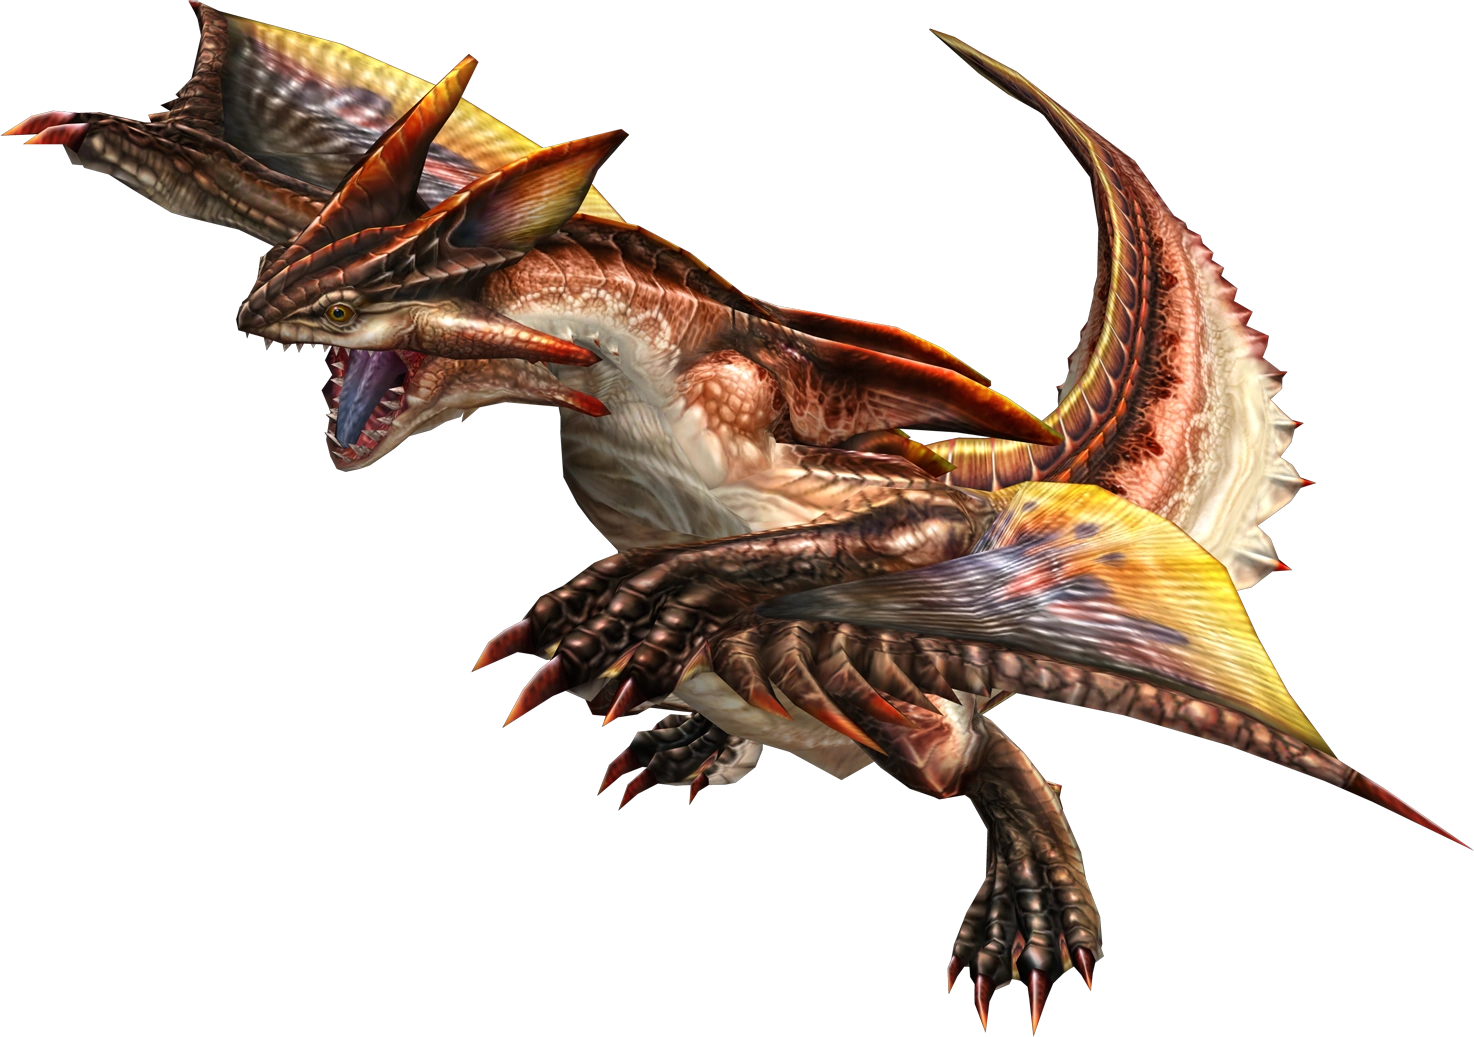 Bannedlagiacrus Pariapuria Is Slow And Sluggish On Land But It S Considered To Be A Heavyweight Amongst The Flying Wyverns Pariapuria Uses Its Immense Weight To Overpower Prey With Ease Although